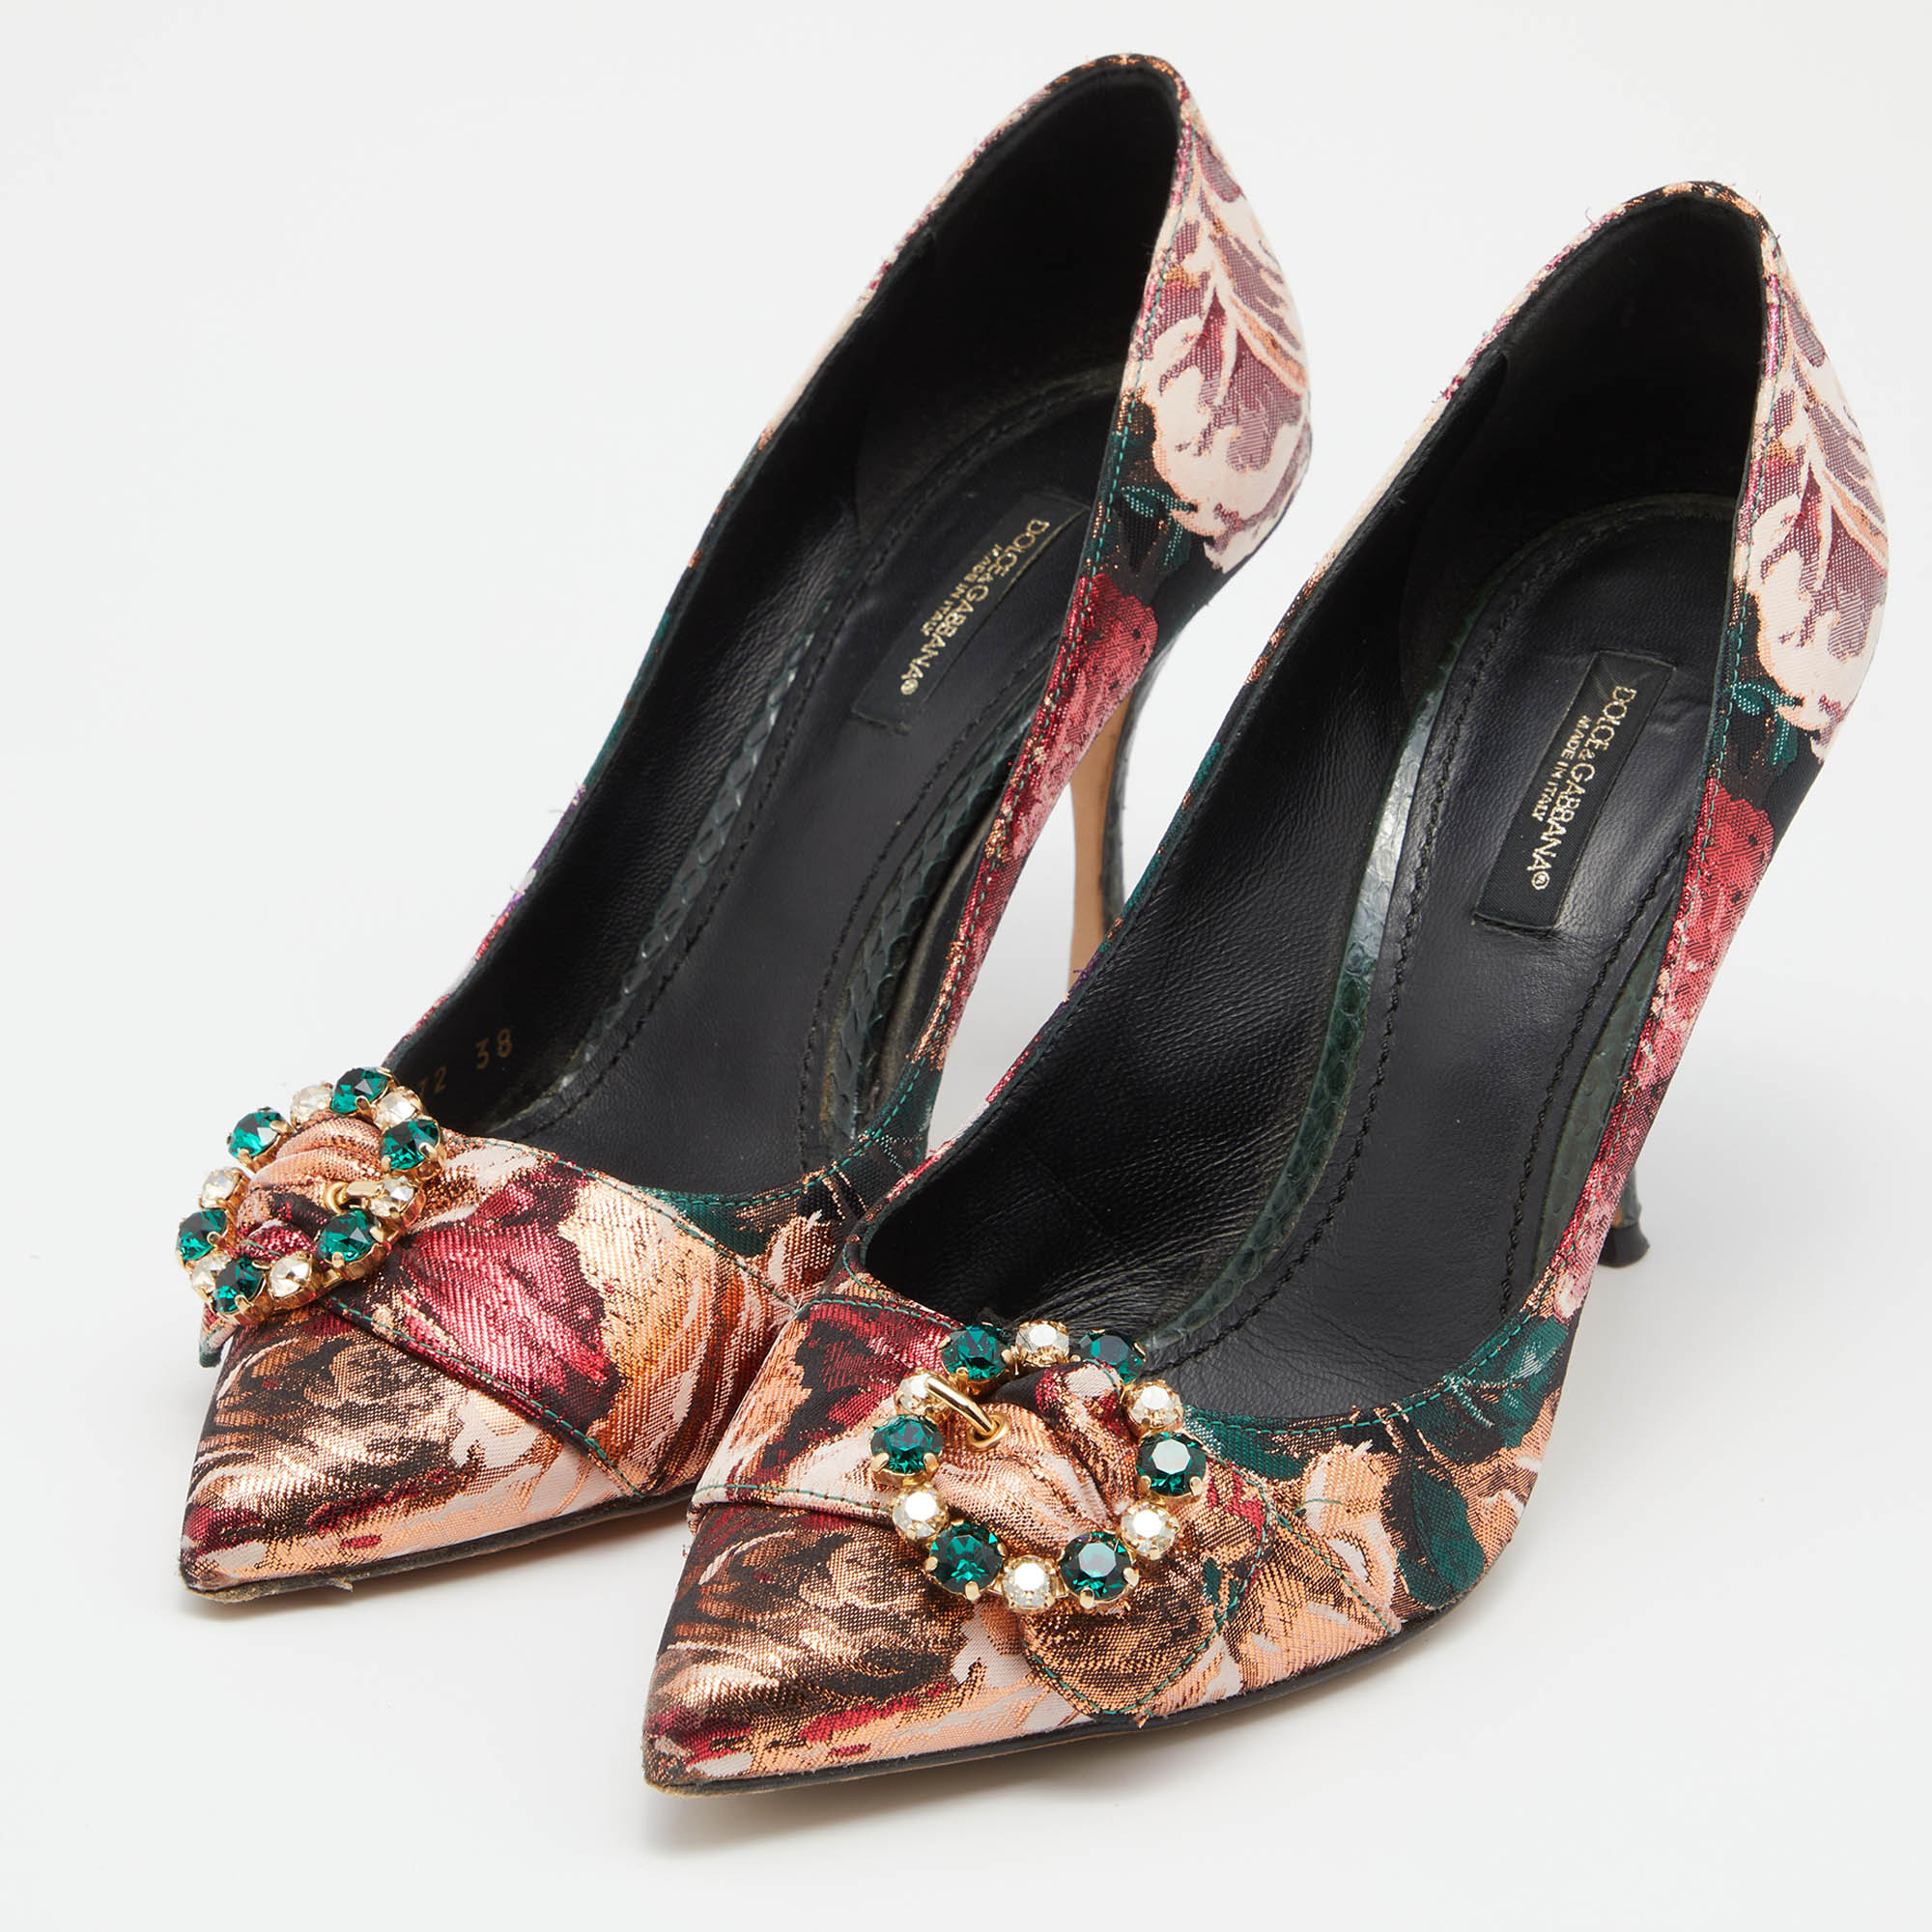 

Dolce & Gabbana Multicolor Floral Fabric and Water Snake Leather Crystal Embellished Bellucci Pumps Size